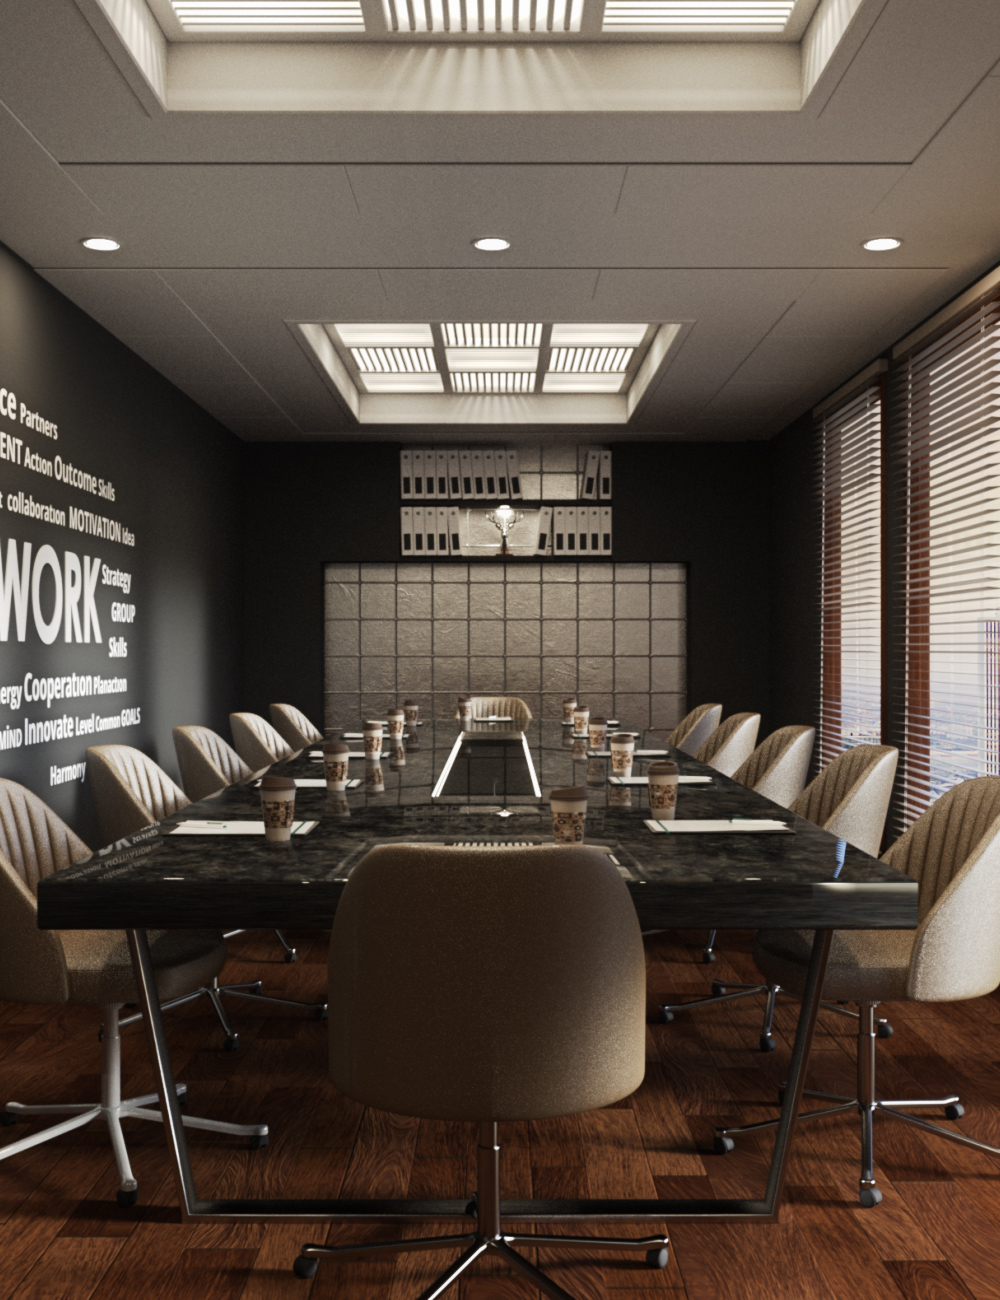 Meeting Room by: Neikdian, 3D Models by Daz 3D